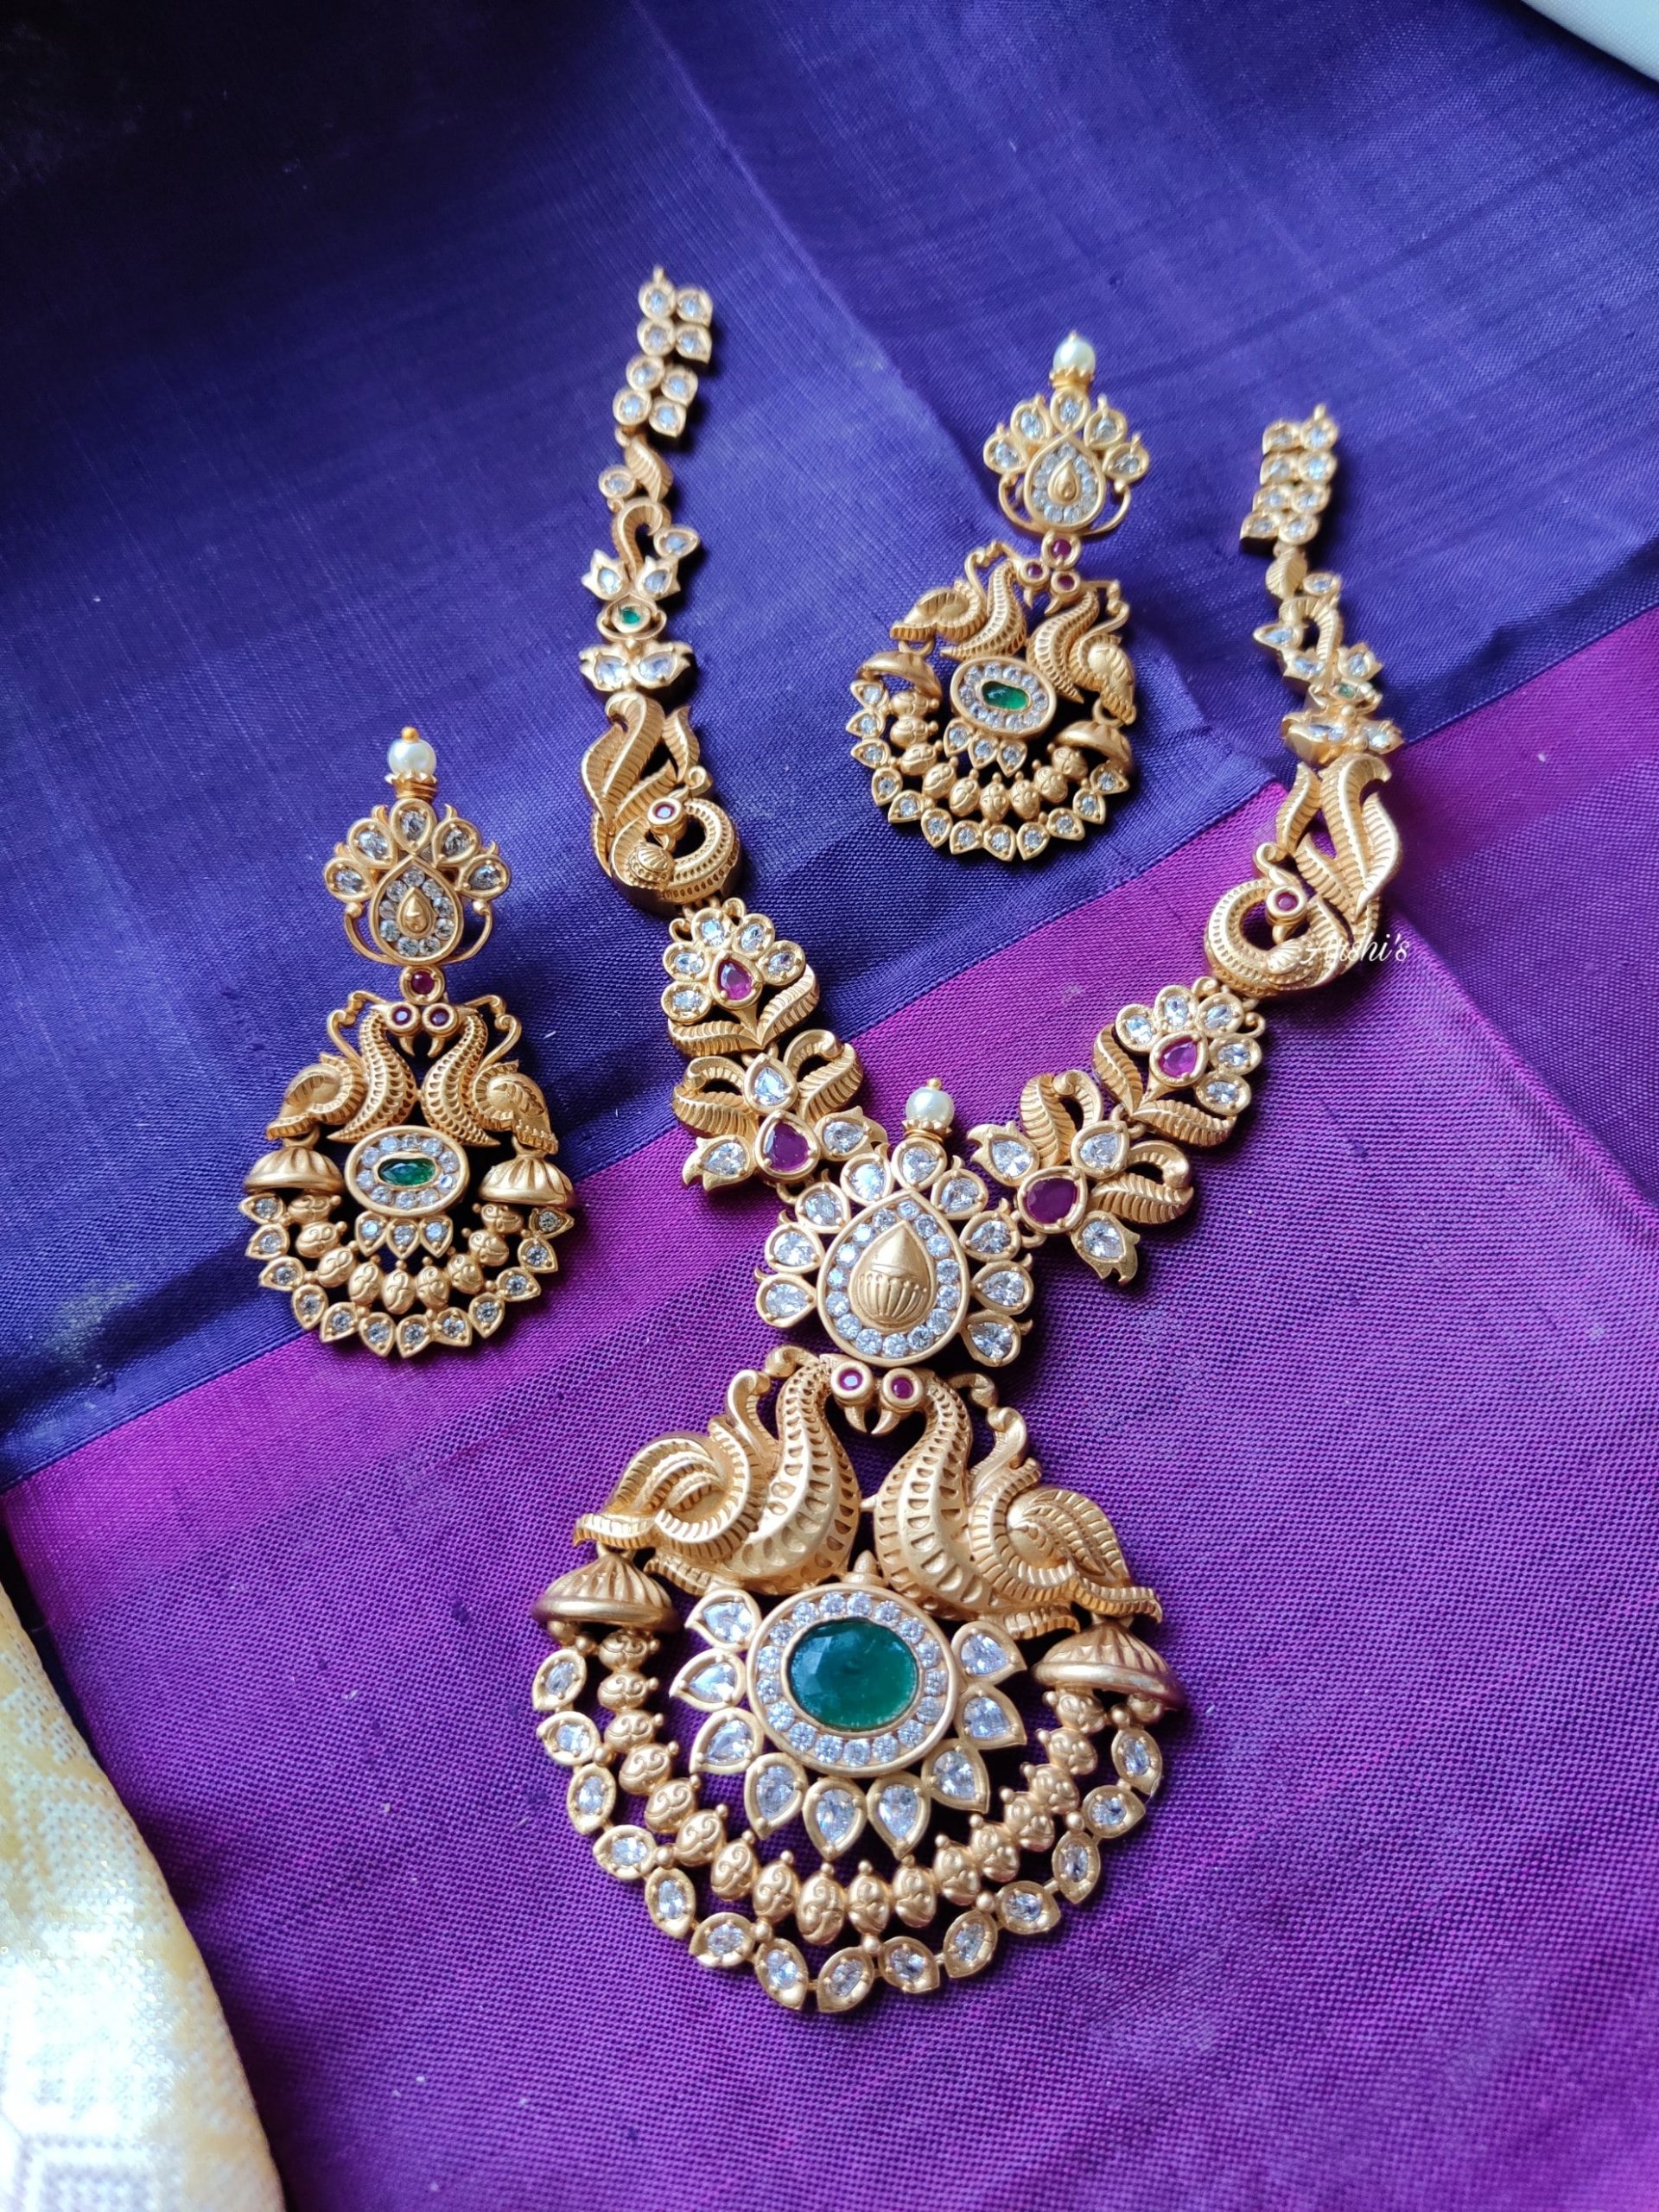 Buy Silver Toned Handcrafted Brass Peacock Necklace with Earrings Set of 2   AKL6622AKAR10SEP  The loom